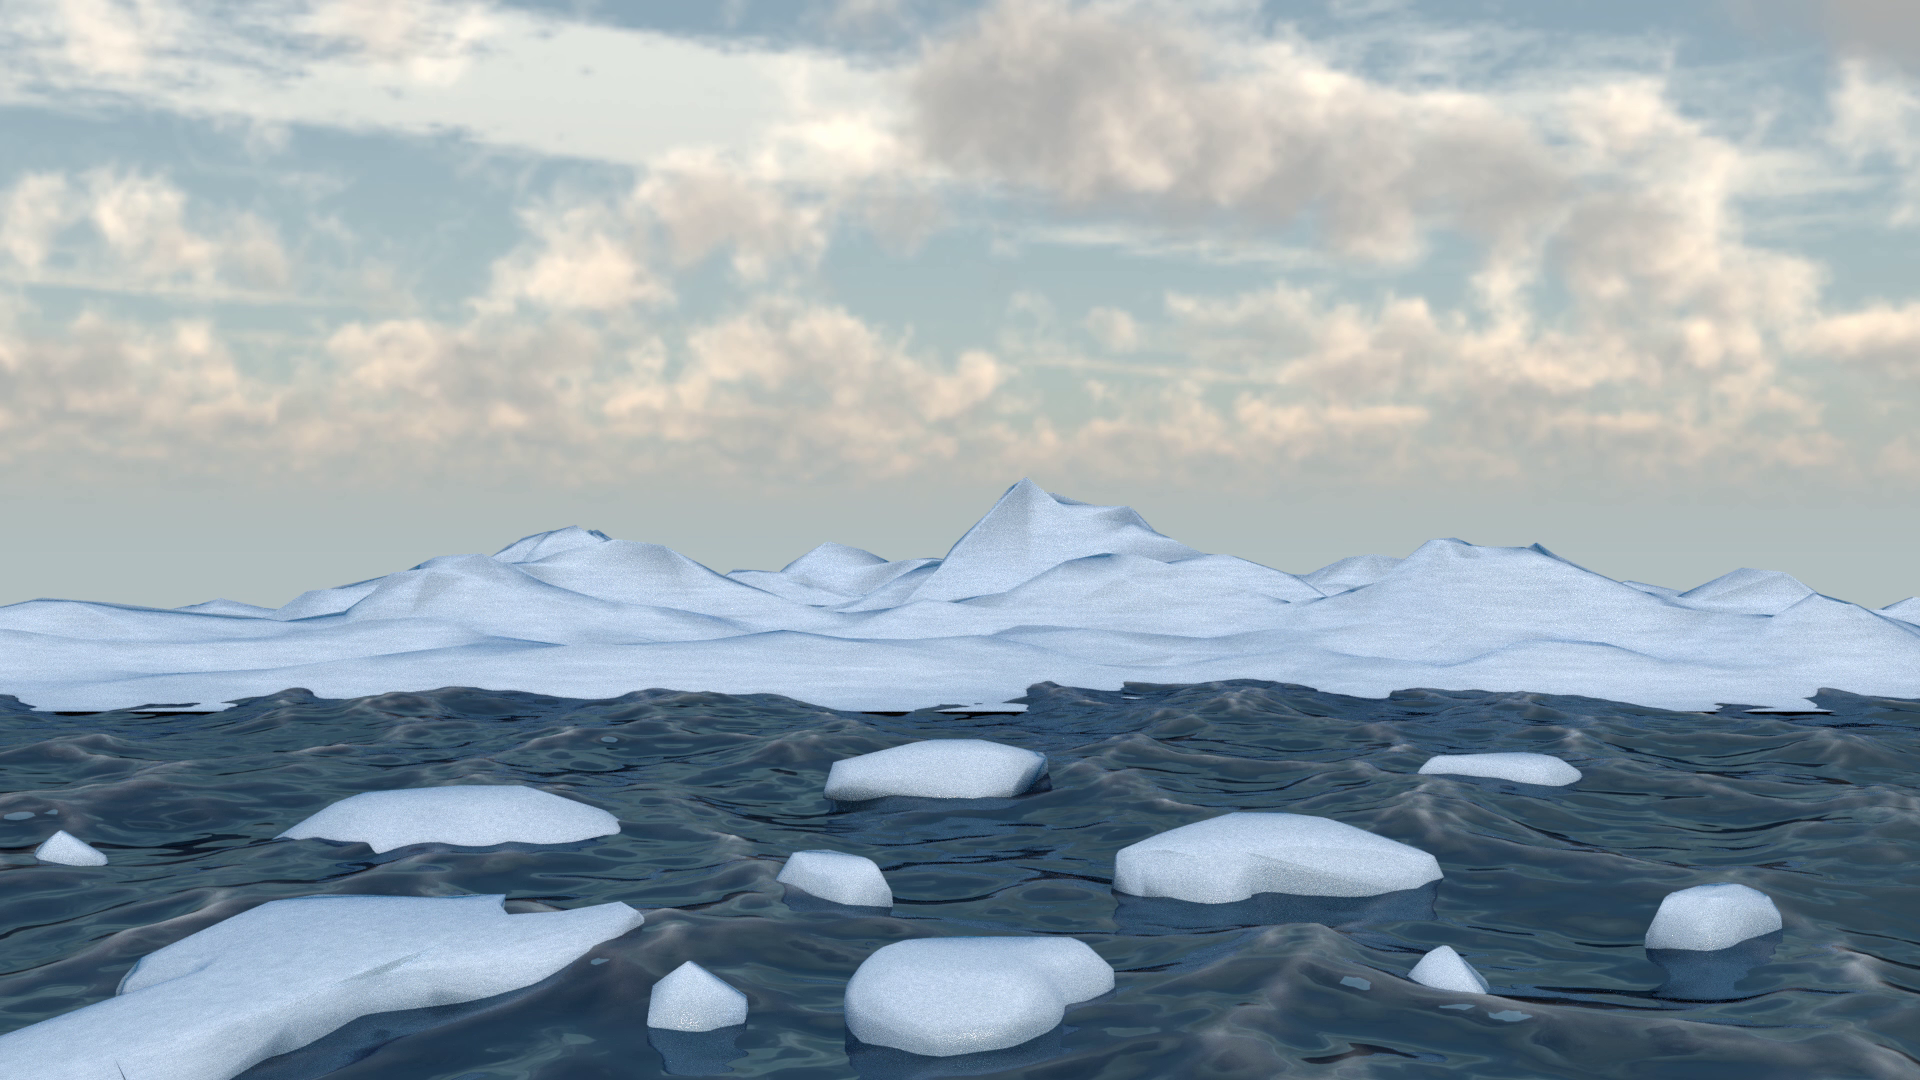 A Frame from Scene 4, showing the ocean with ice pieces and an iceberg in the background, the sun above in the sky.